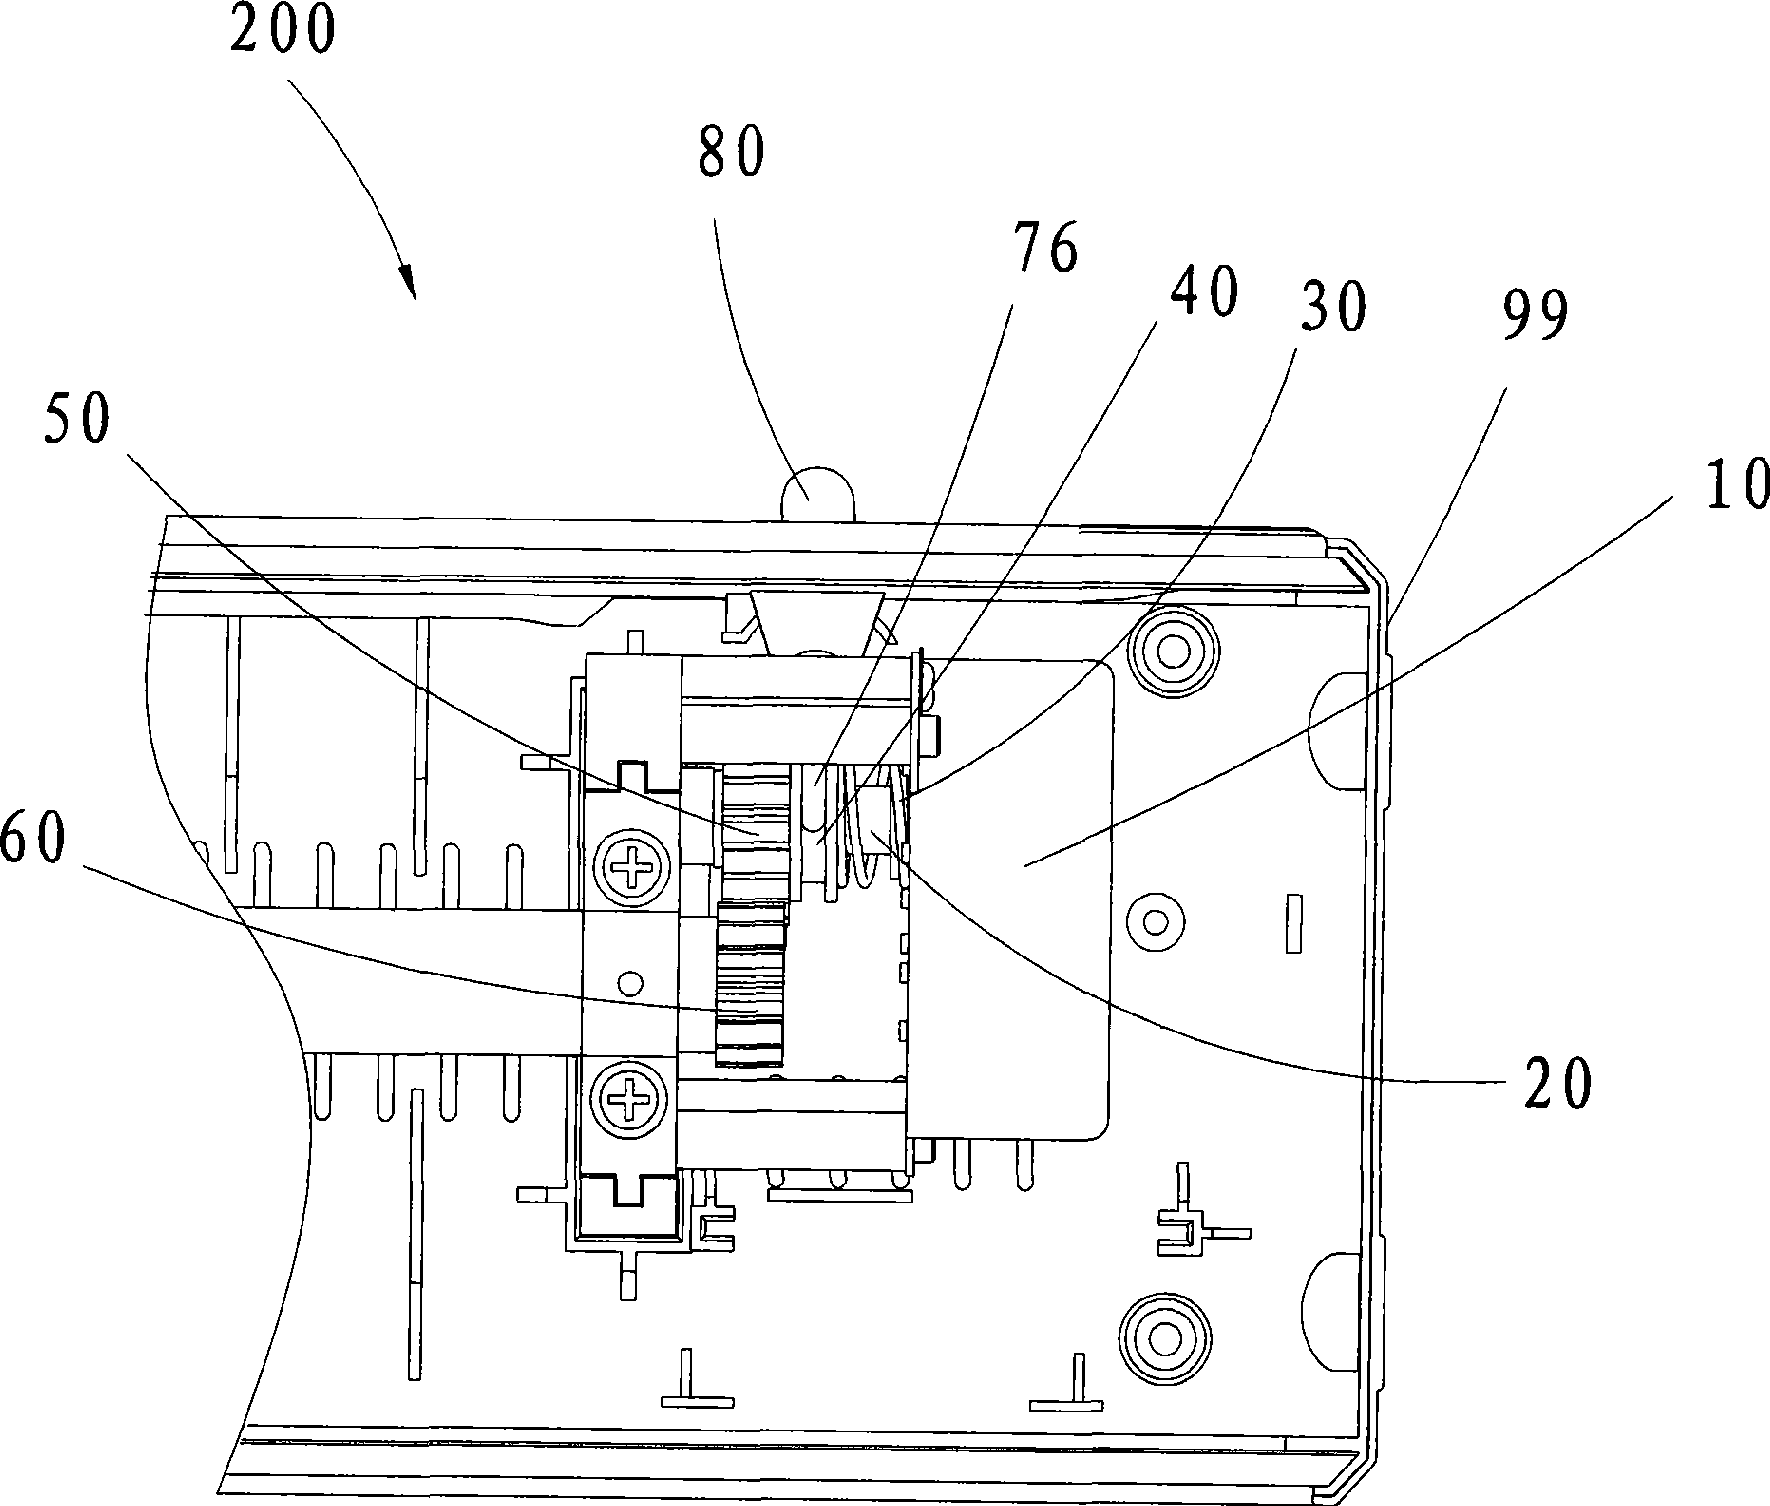 Engaging and disengaging gear and gluing machine using the same